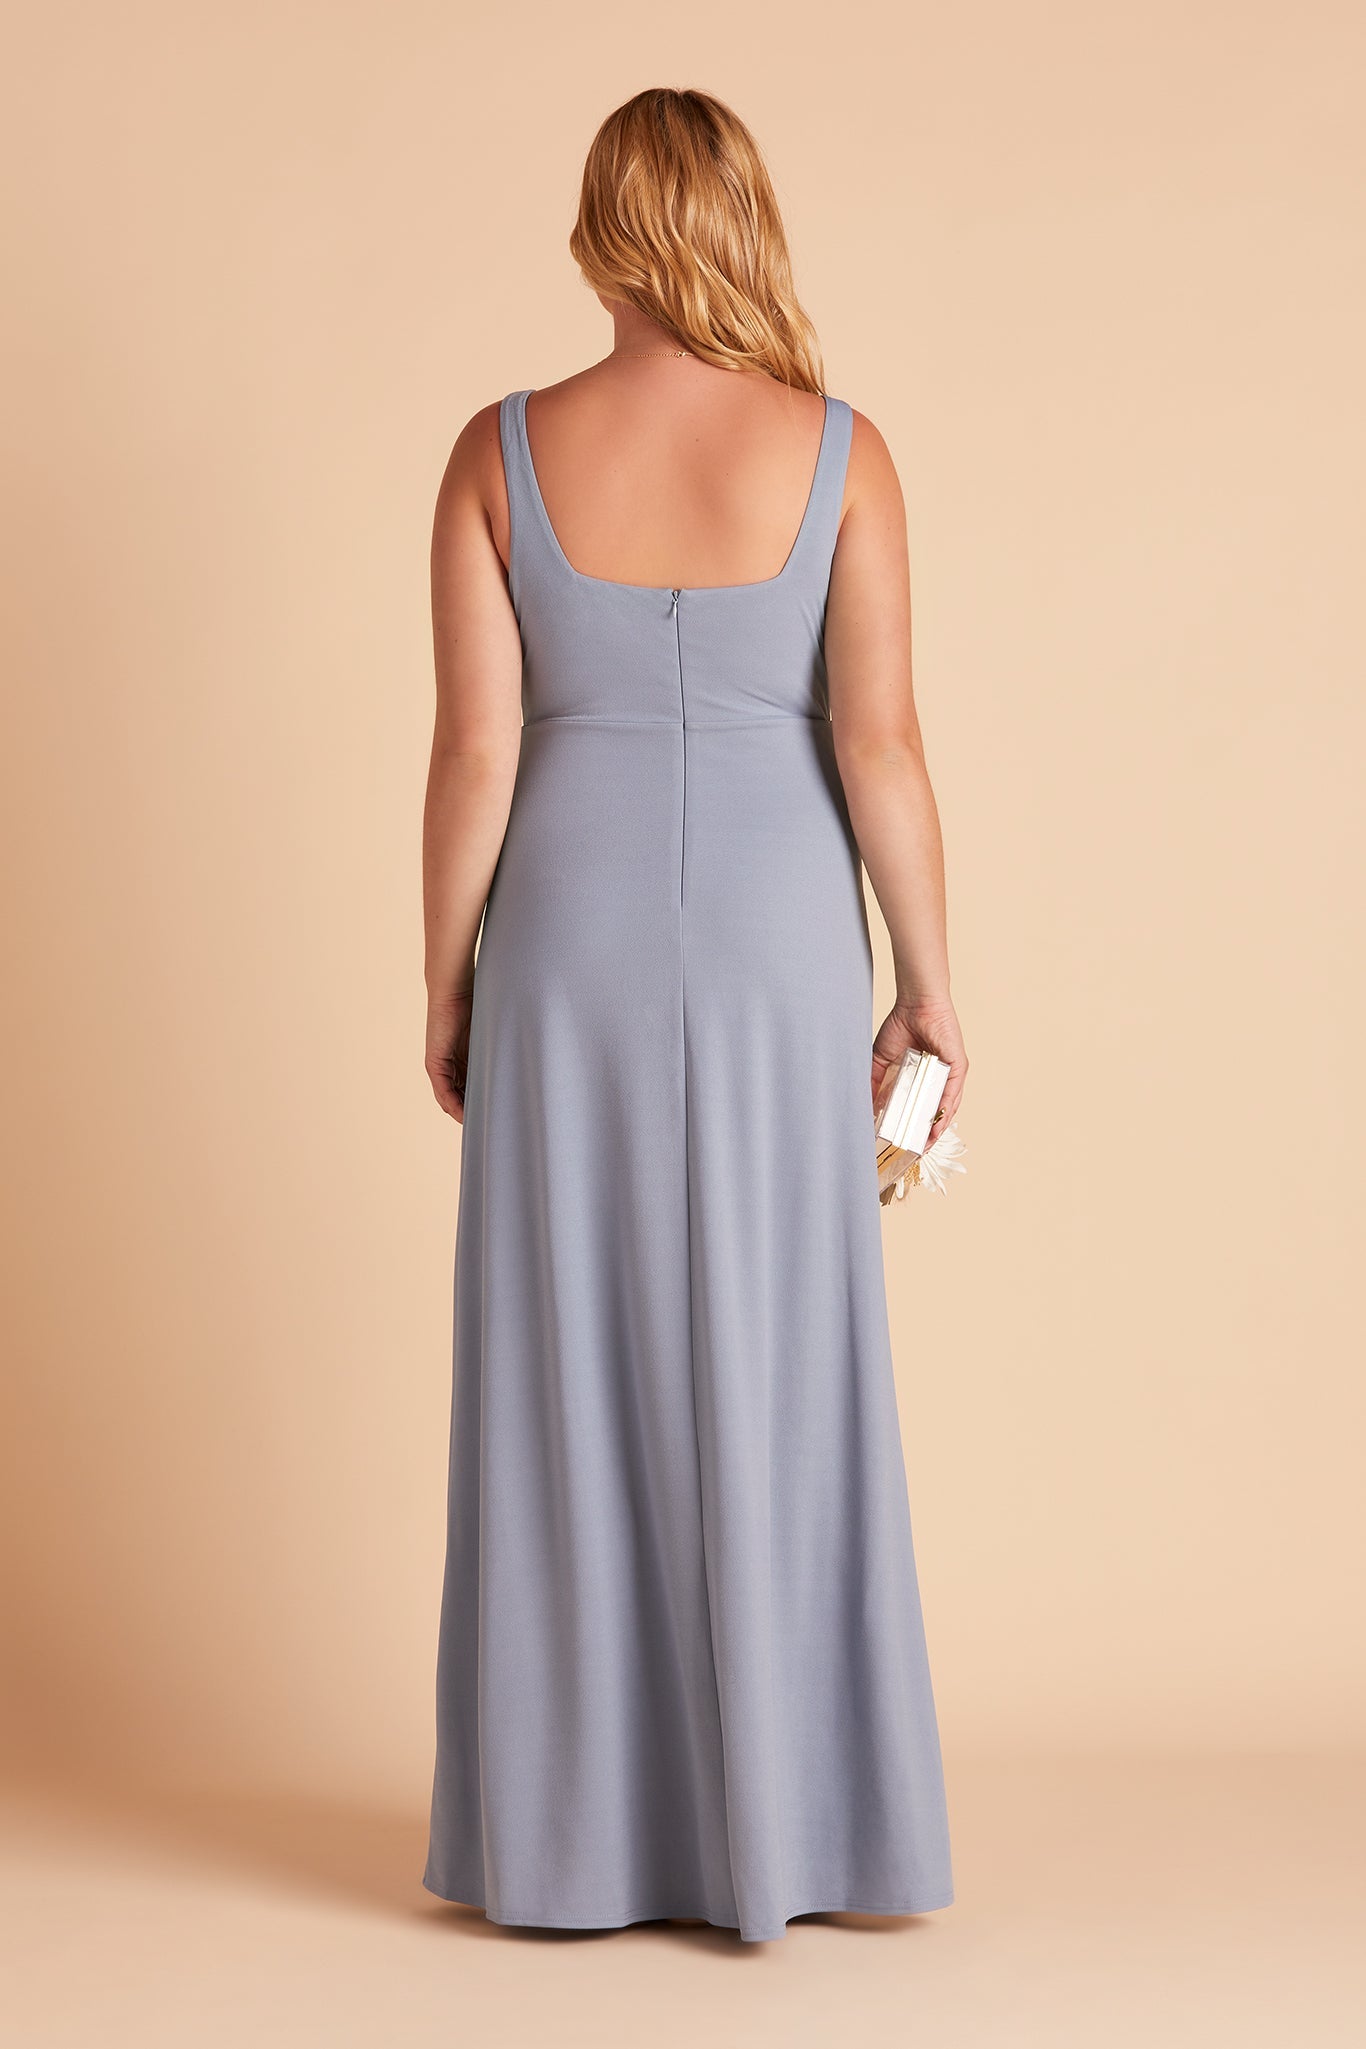 Alex convertible plus size bridesmaid dress with slit in dusty blue crepe by Birdy Grey, back view